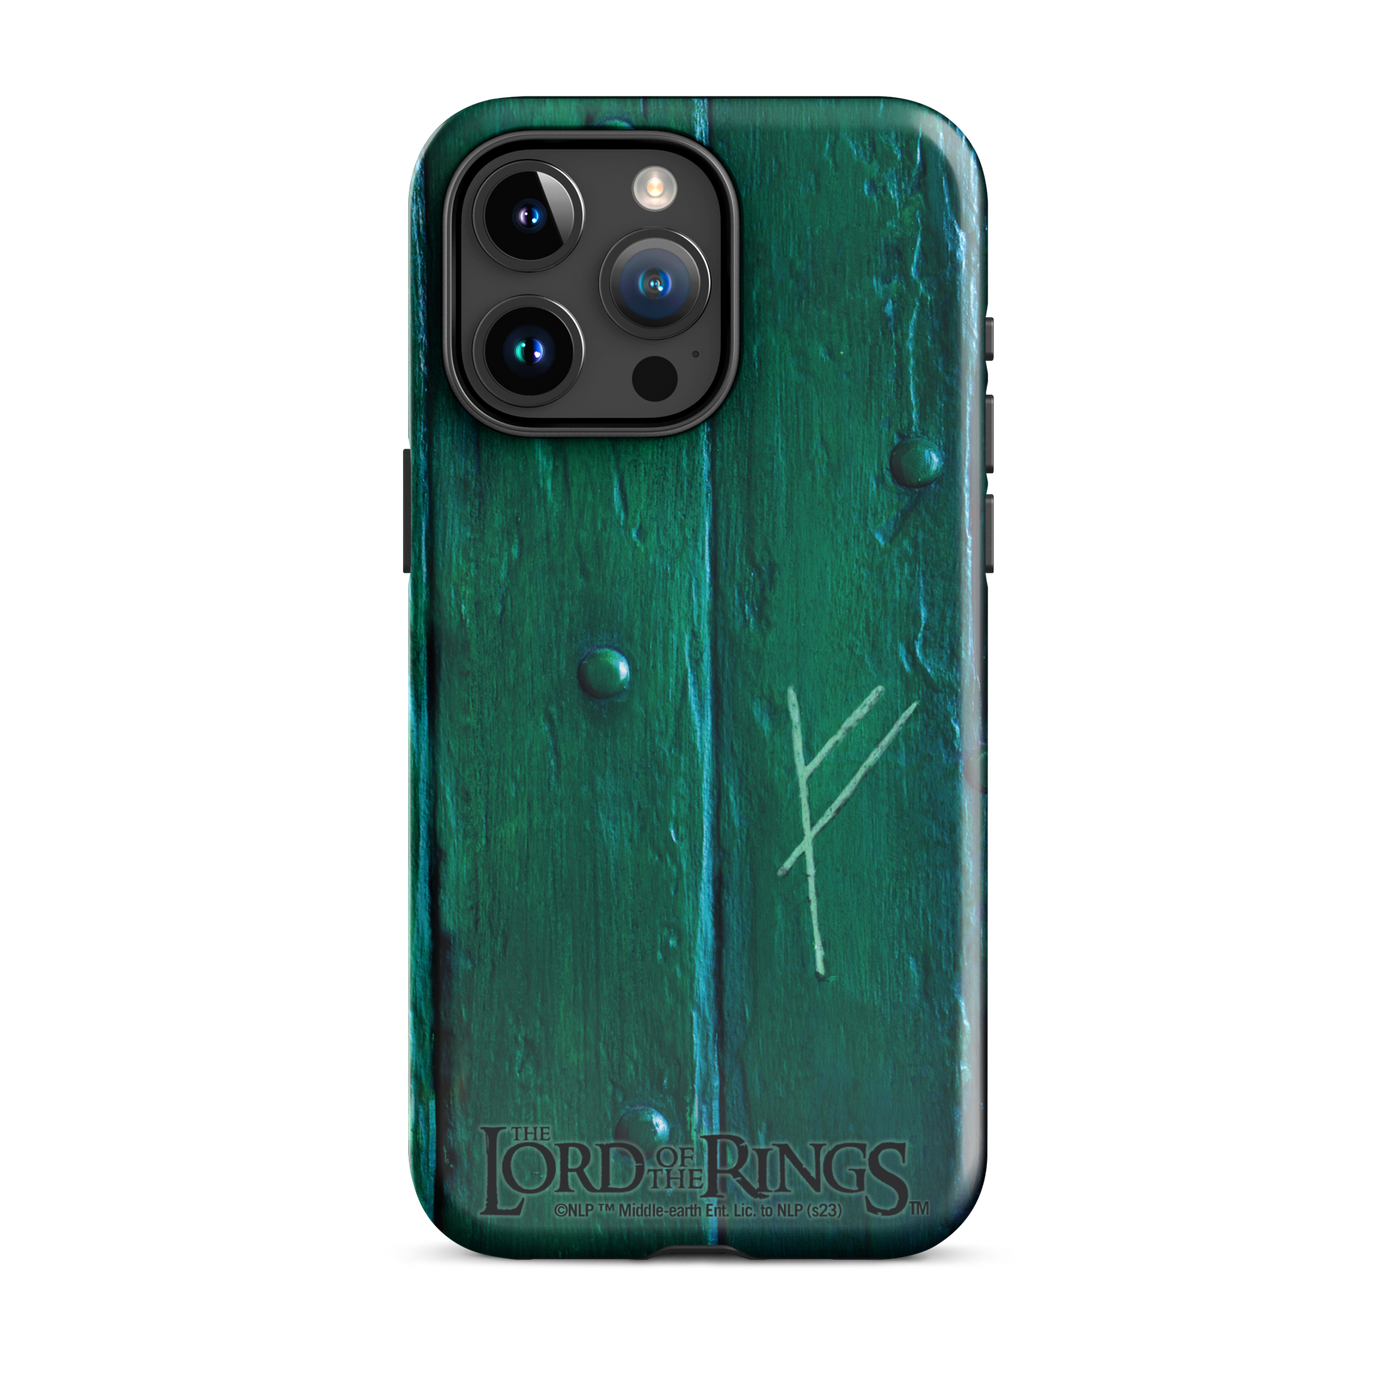 Lord of the Rings Bilbo's Door Tough Phone Case - iPhone